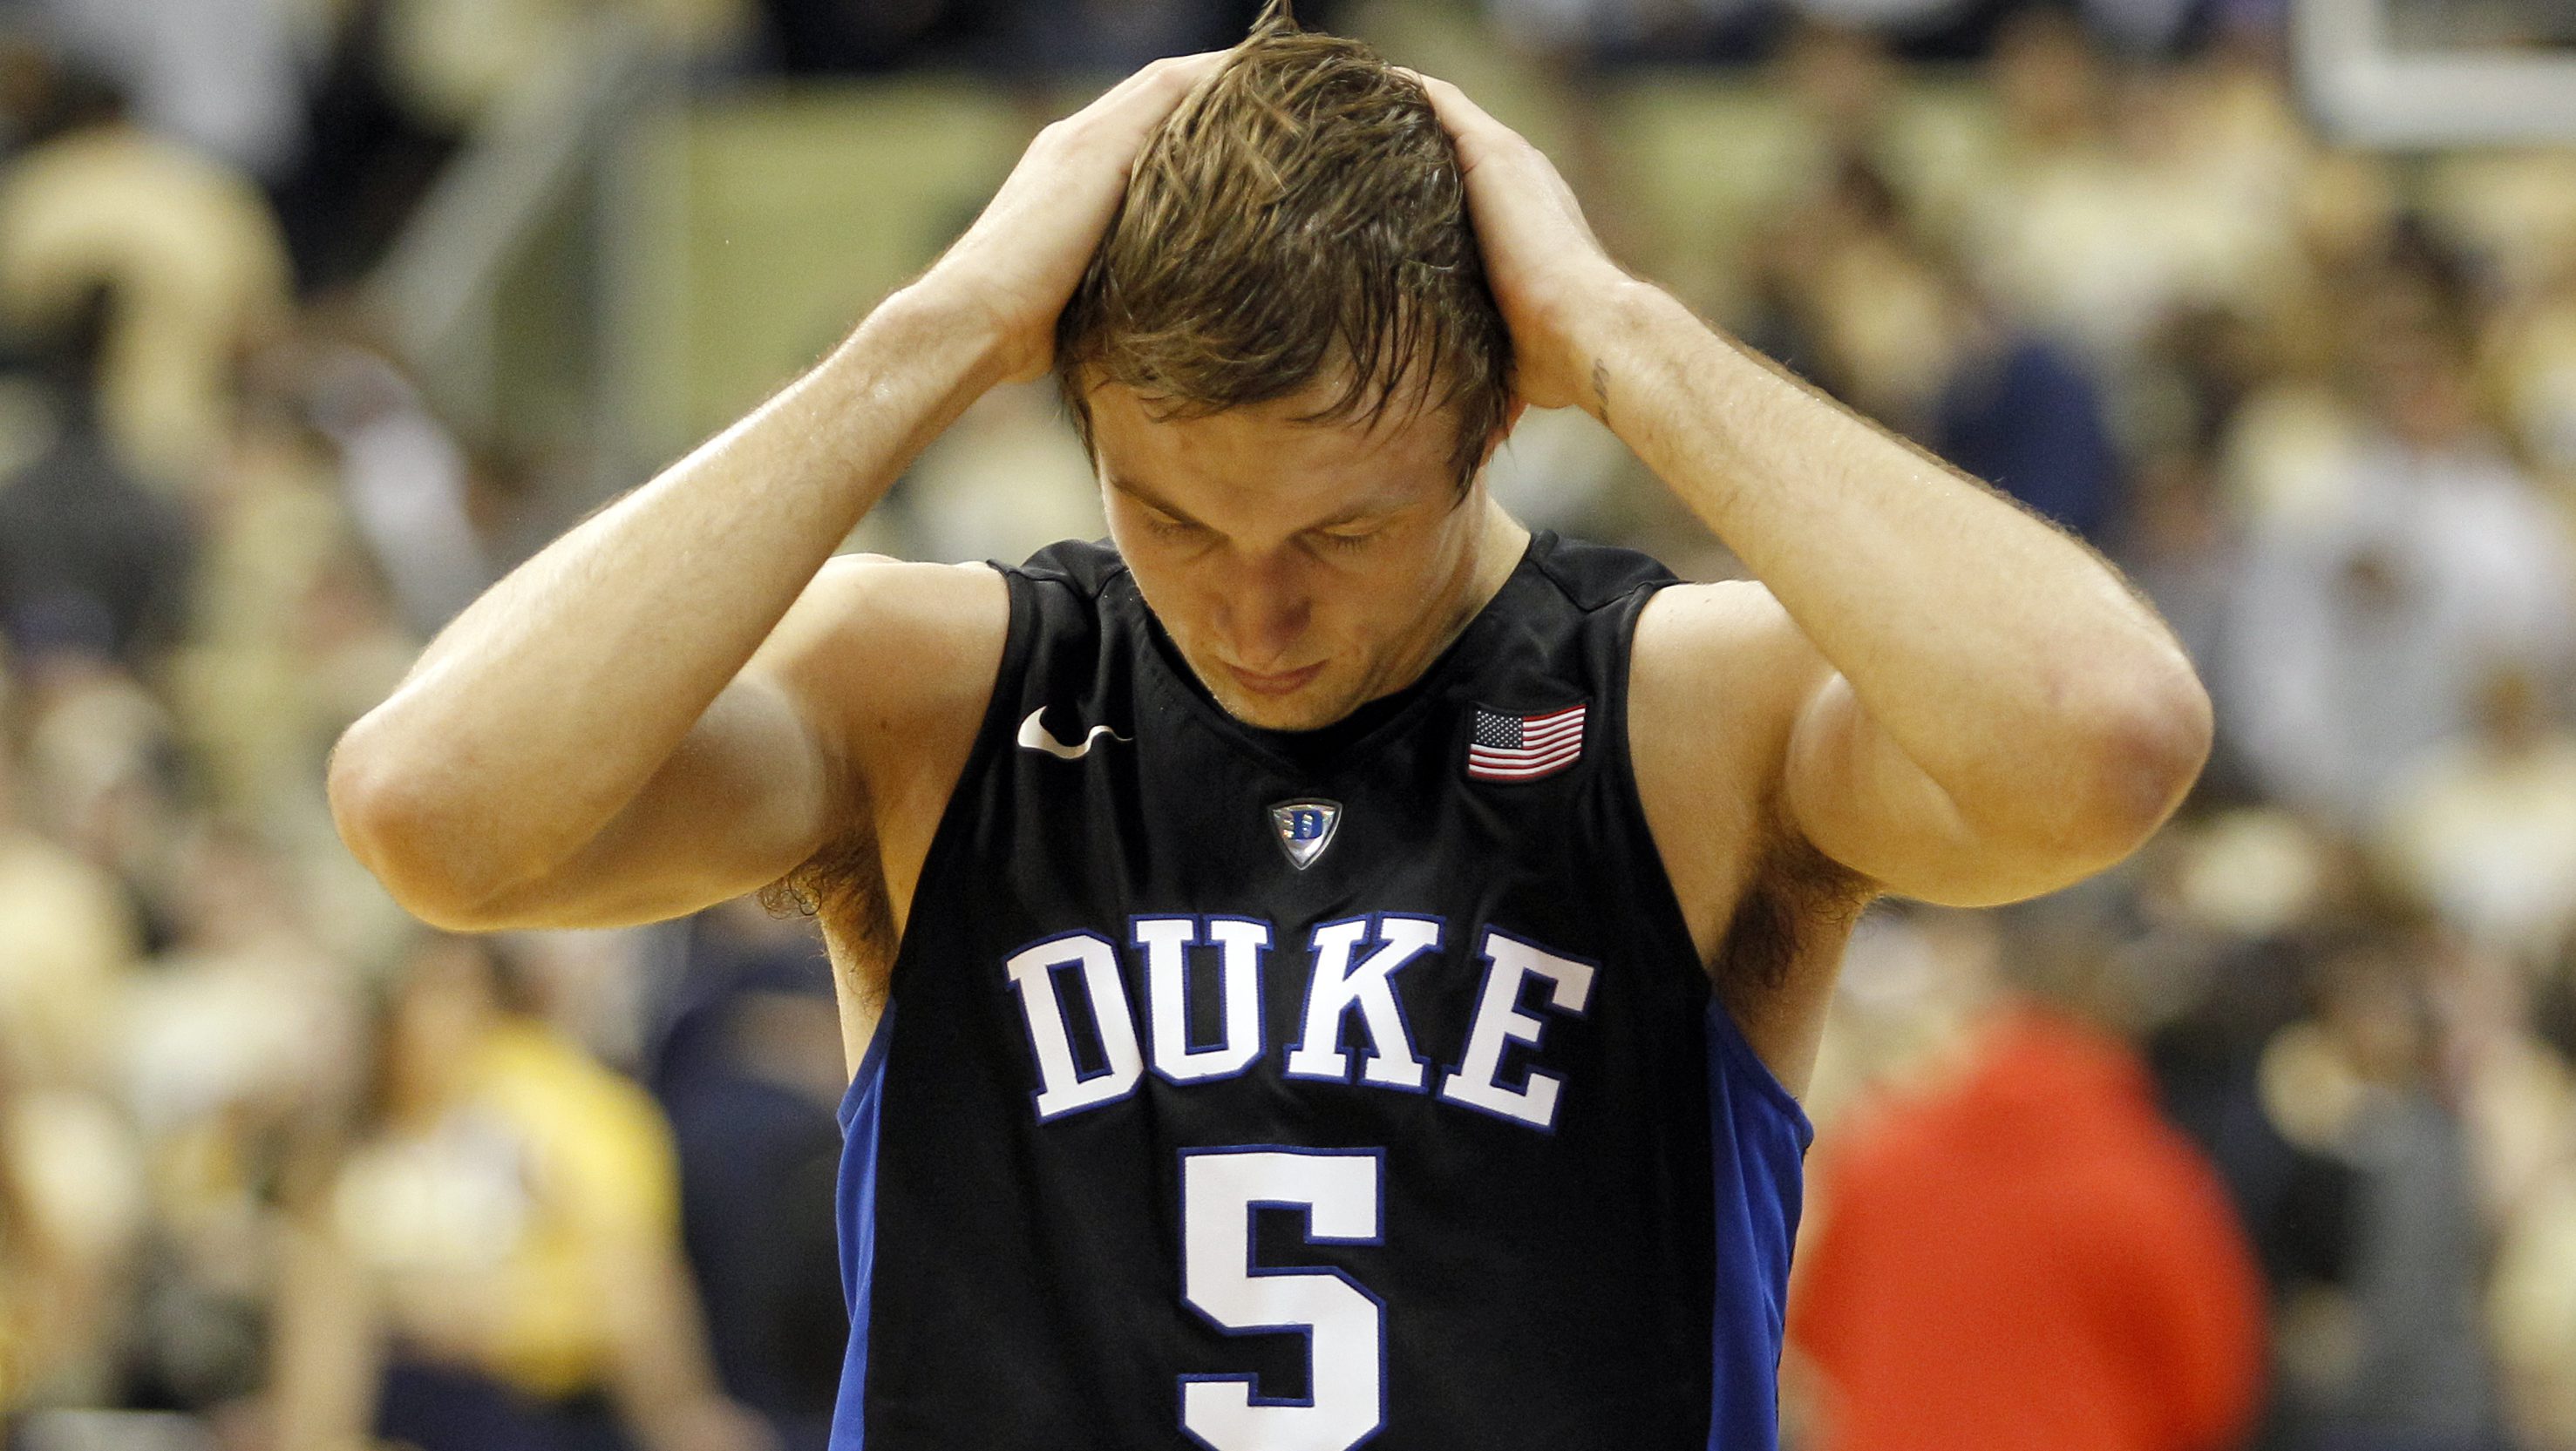 PITTSBURGH, PA - FEBRUARY 28: Luke Kennard #5 of the Duke Blue Devils reacts after losing 76-62 to the Pittsburgh Panthers during the game at Petersen Events Center on February 28, 2016 in Pittsburgh, Pennsylvania. (Photo by Justin K. Aller/Getty Images)